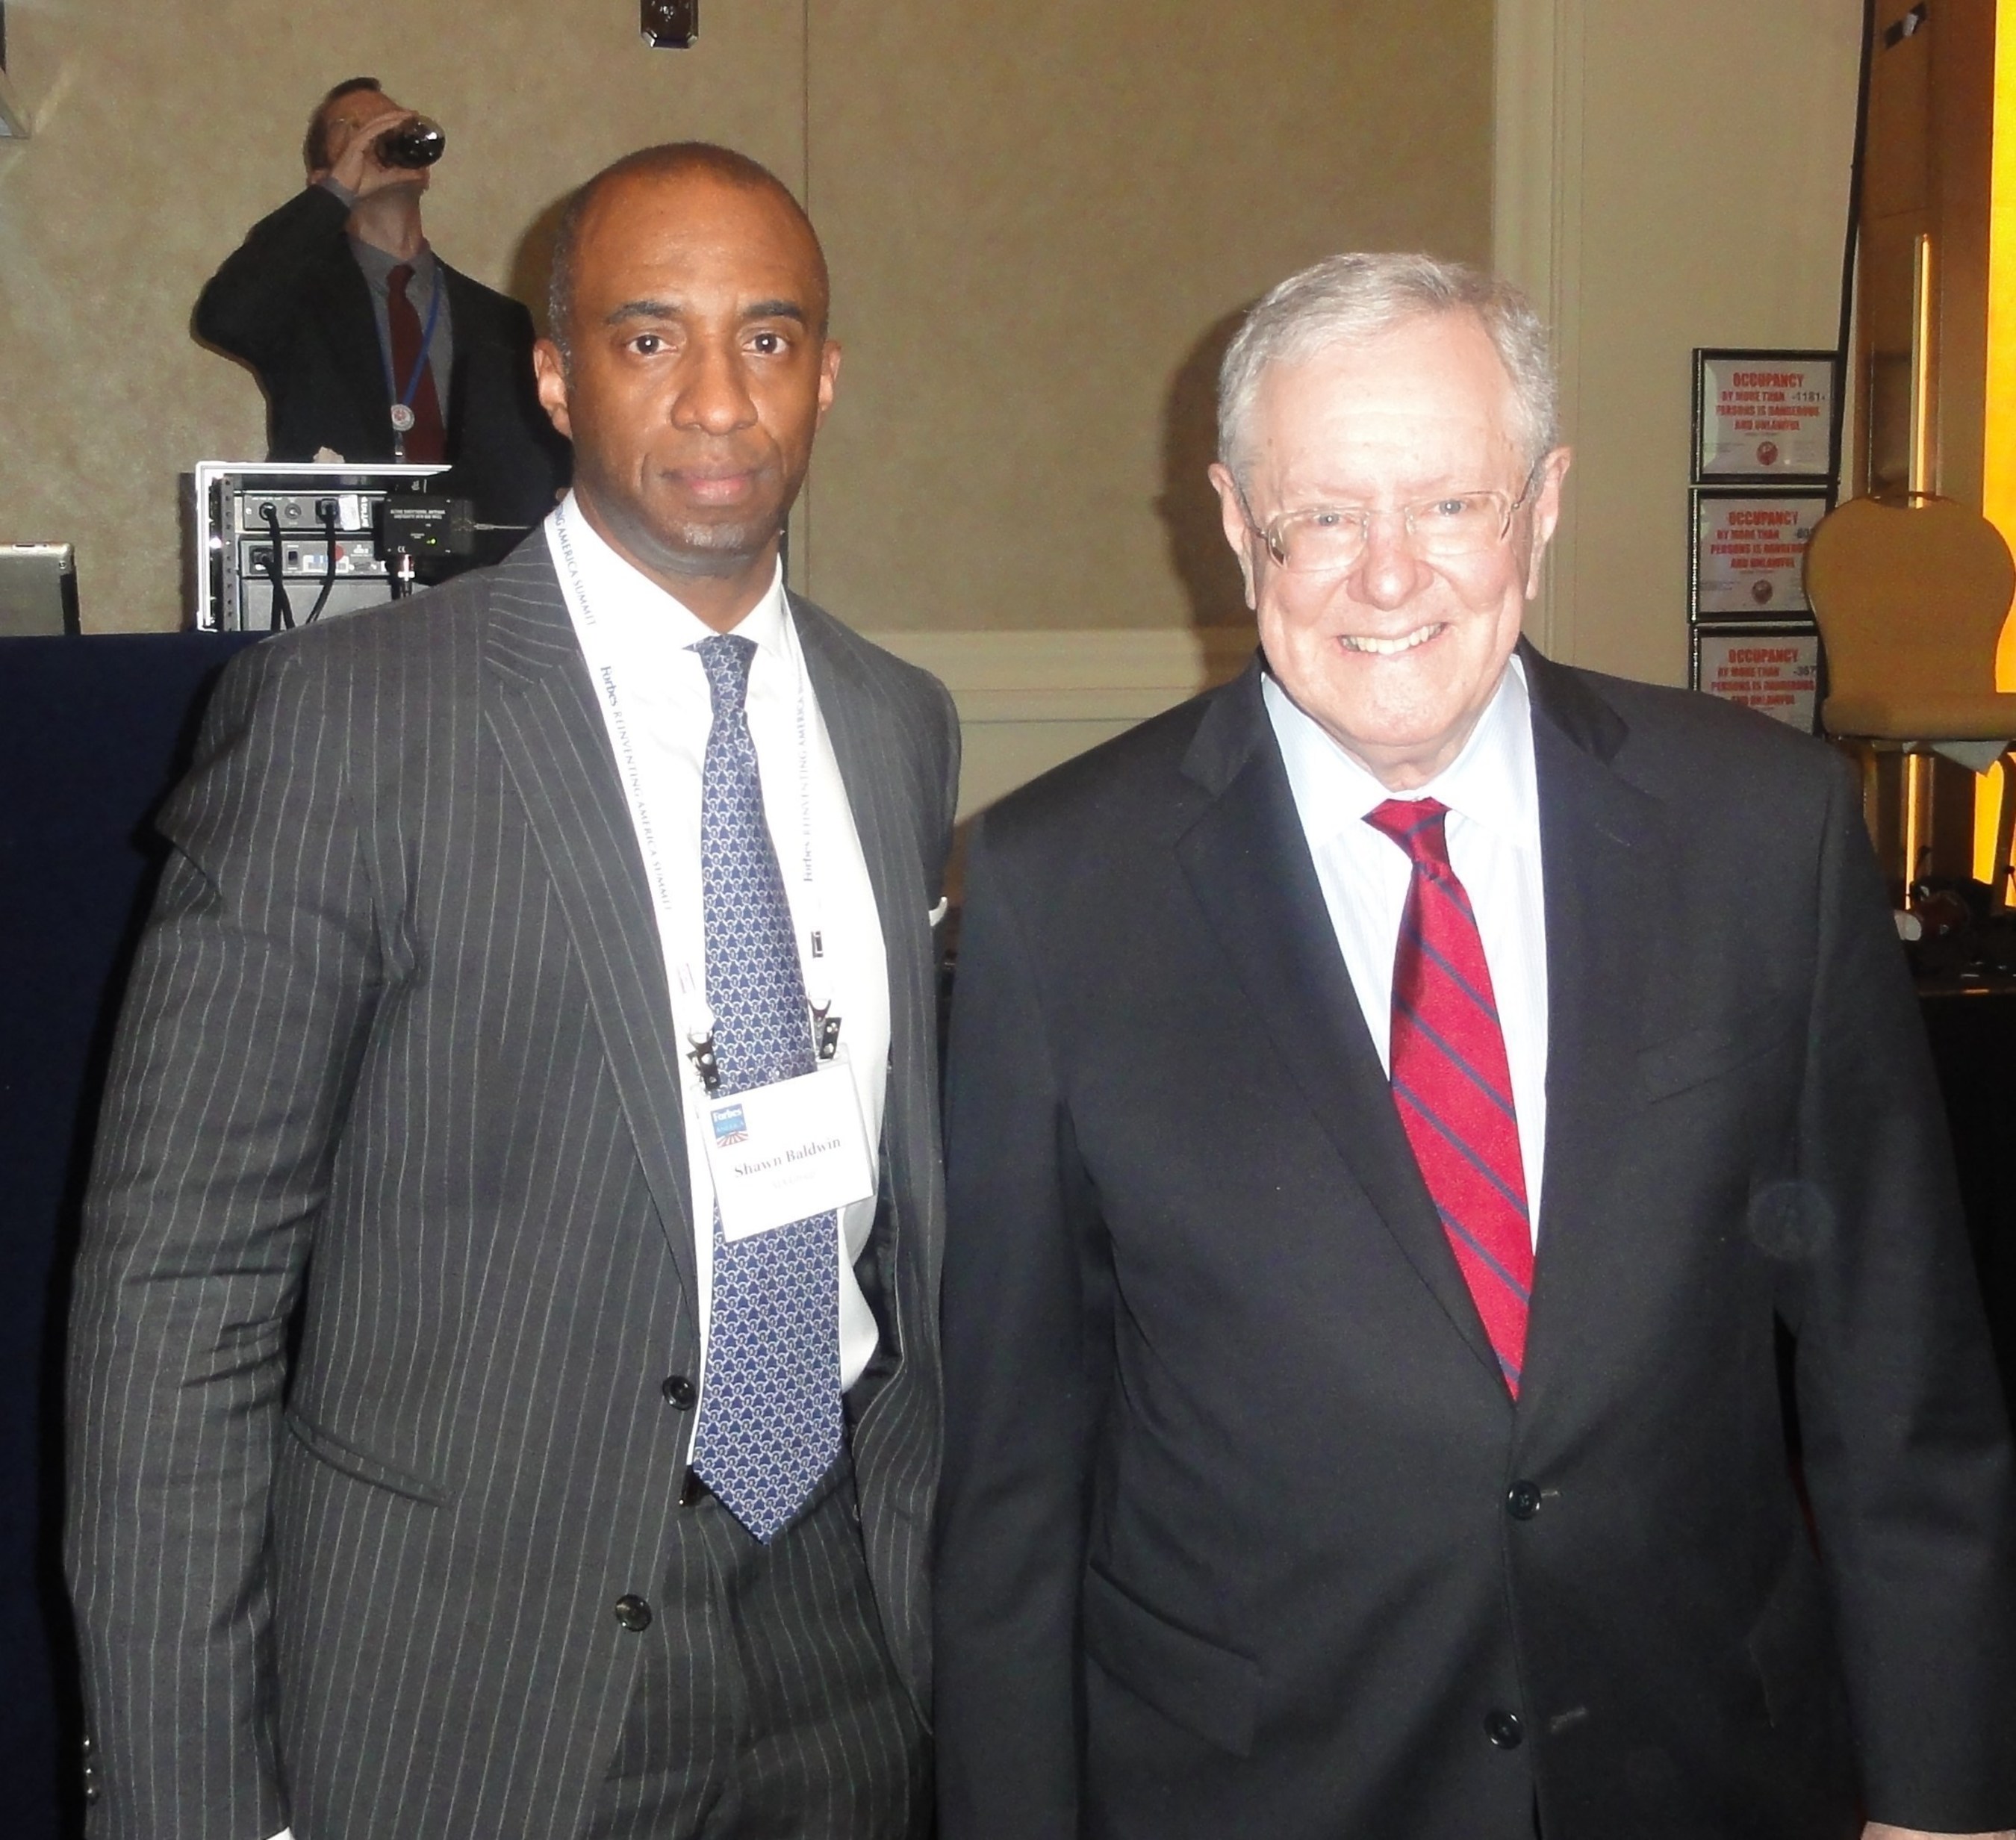 Shawn Baldwin, Chairman of AIA Group, with Steve Forbes, Chairman and editor-in-chief of Forbes Media at the 2015 Forbes Reinventing America Summit.